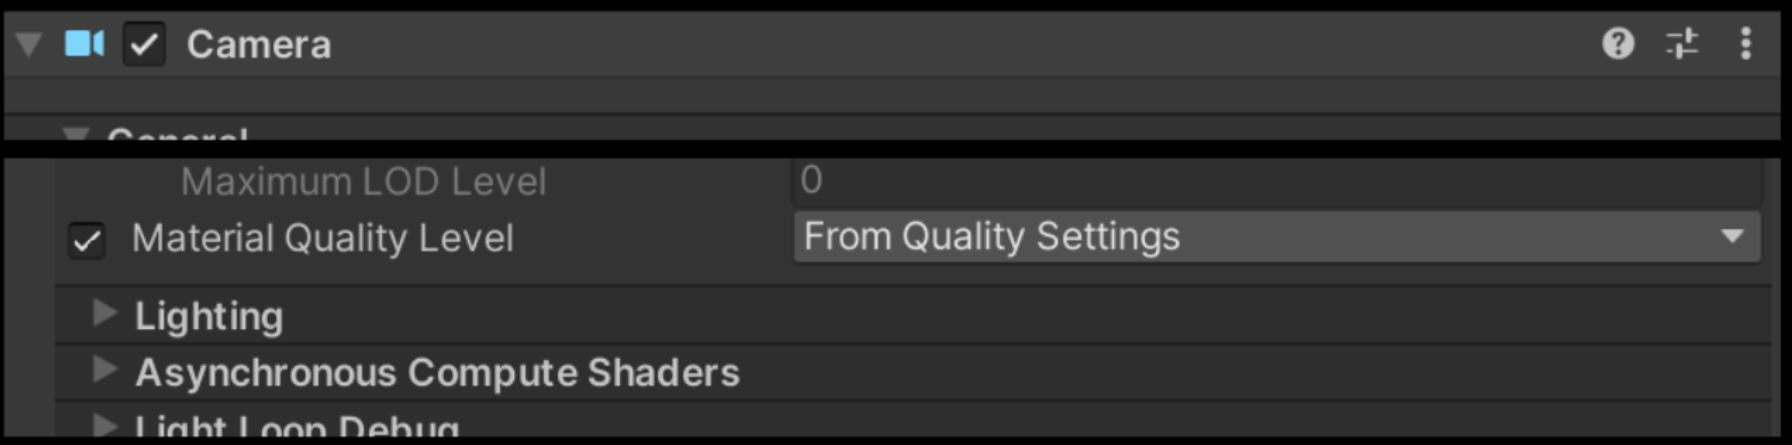 Specifying Material Quality Level from a camera’s Frame Settings override